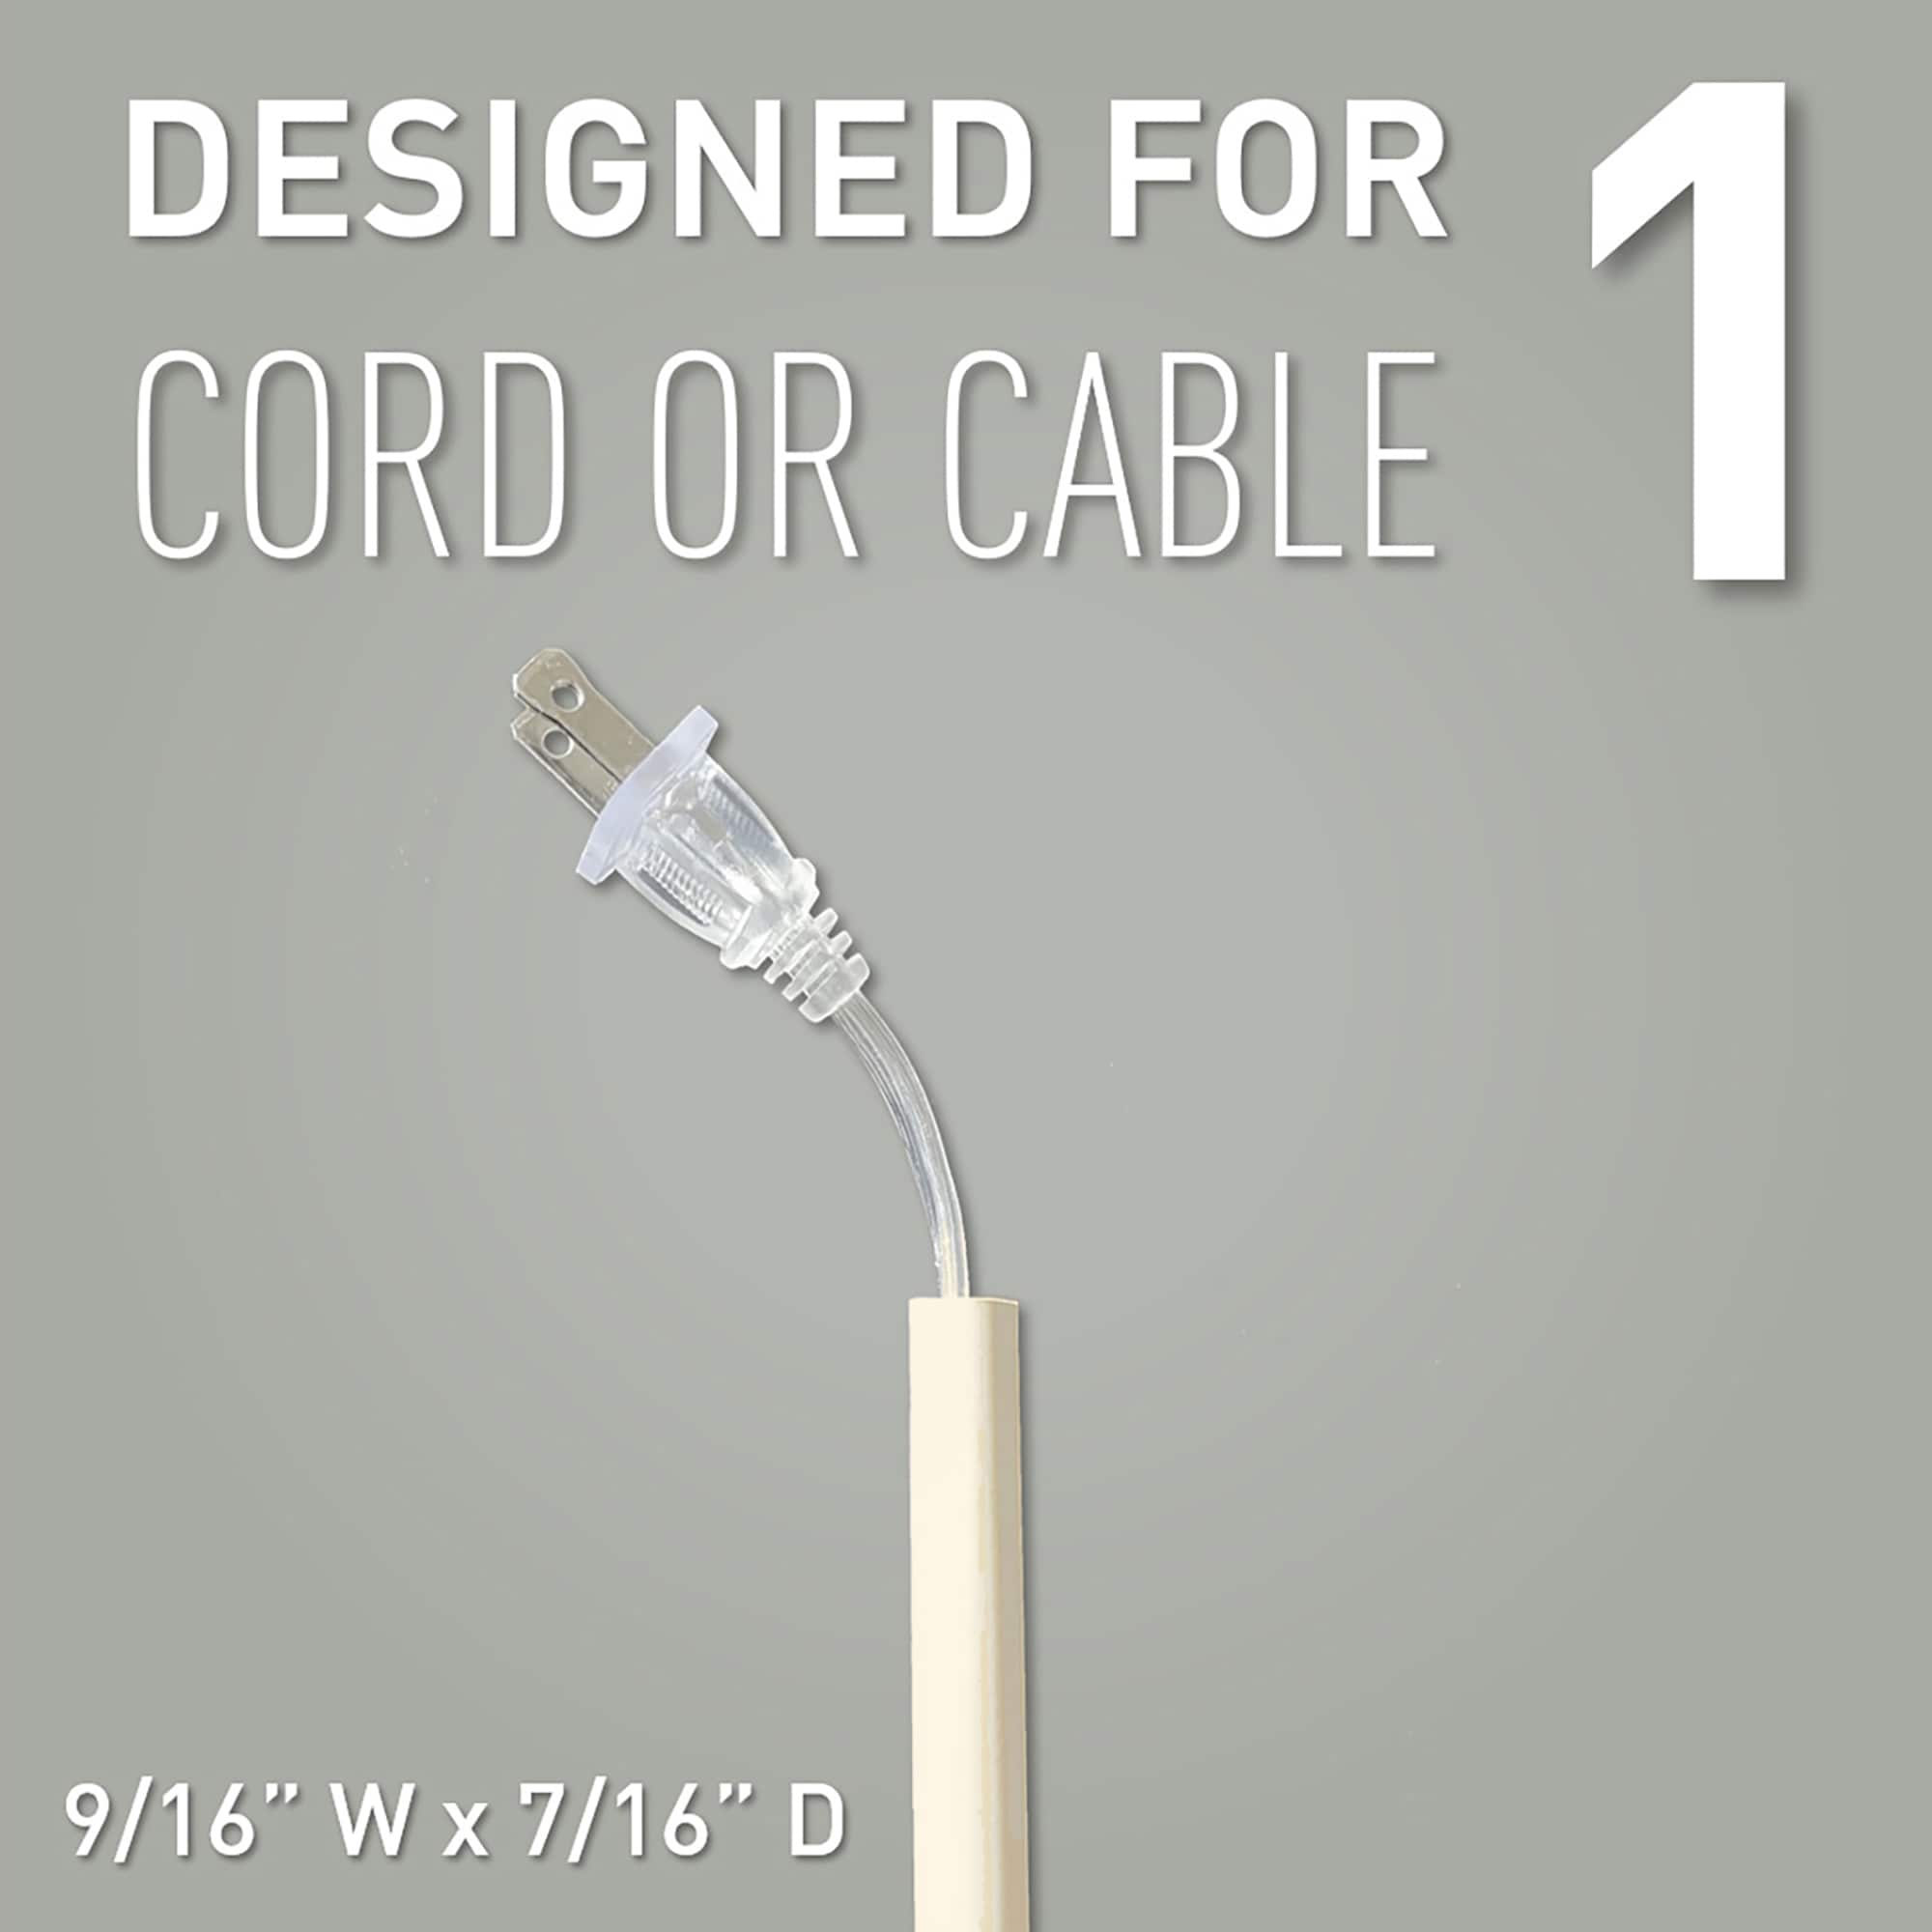 Corduct 5' Overfloor Cord Protector, Gray, Nonmetallic, Raceway and Cord  Covers